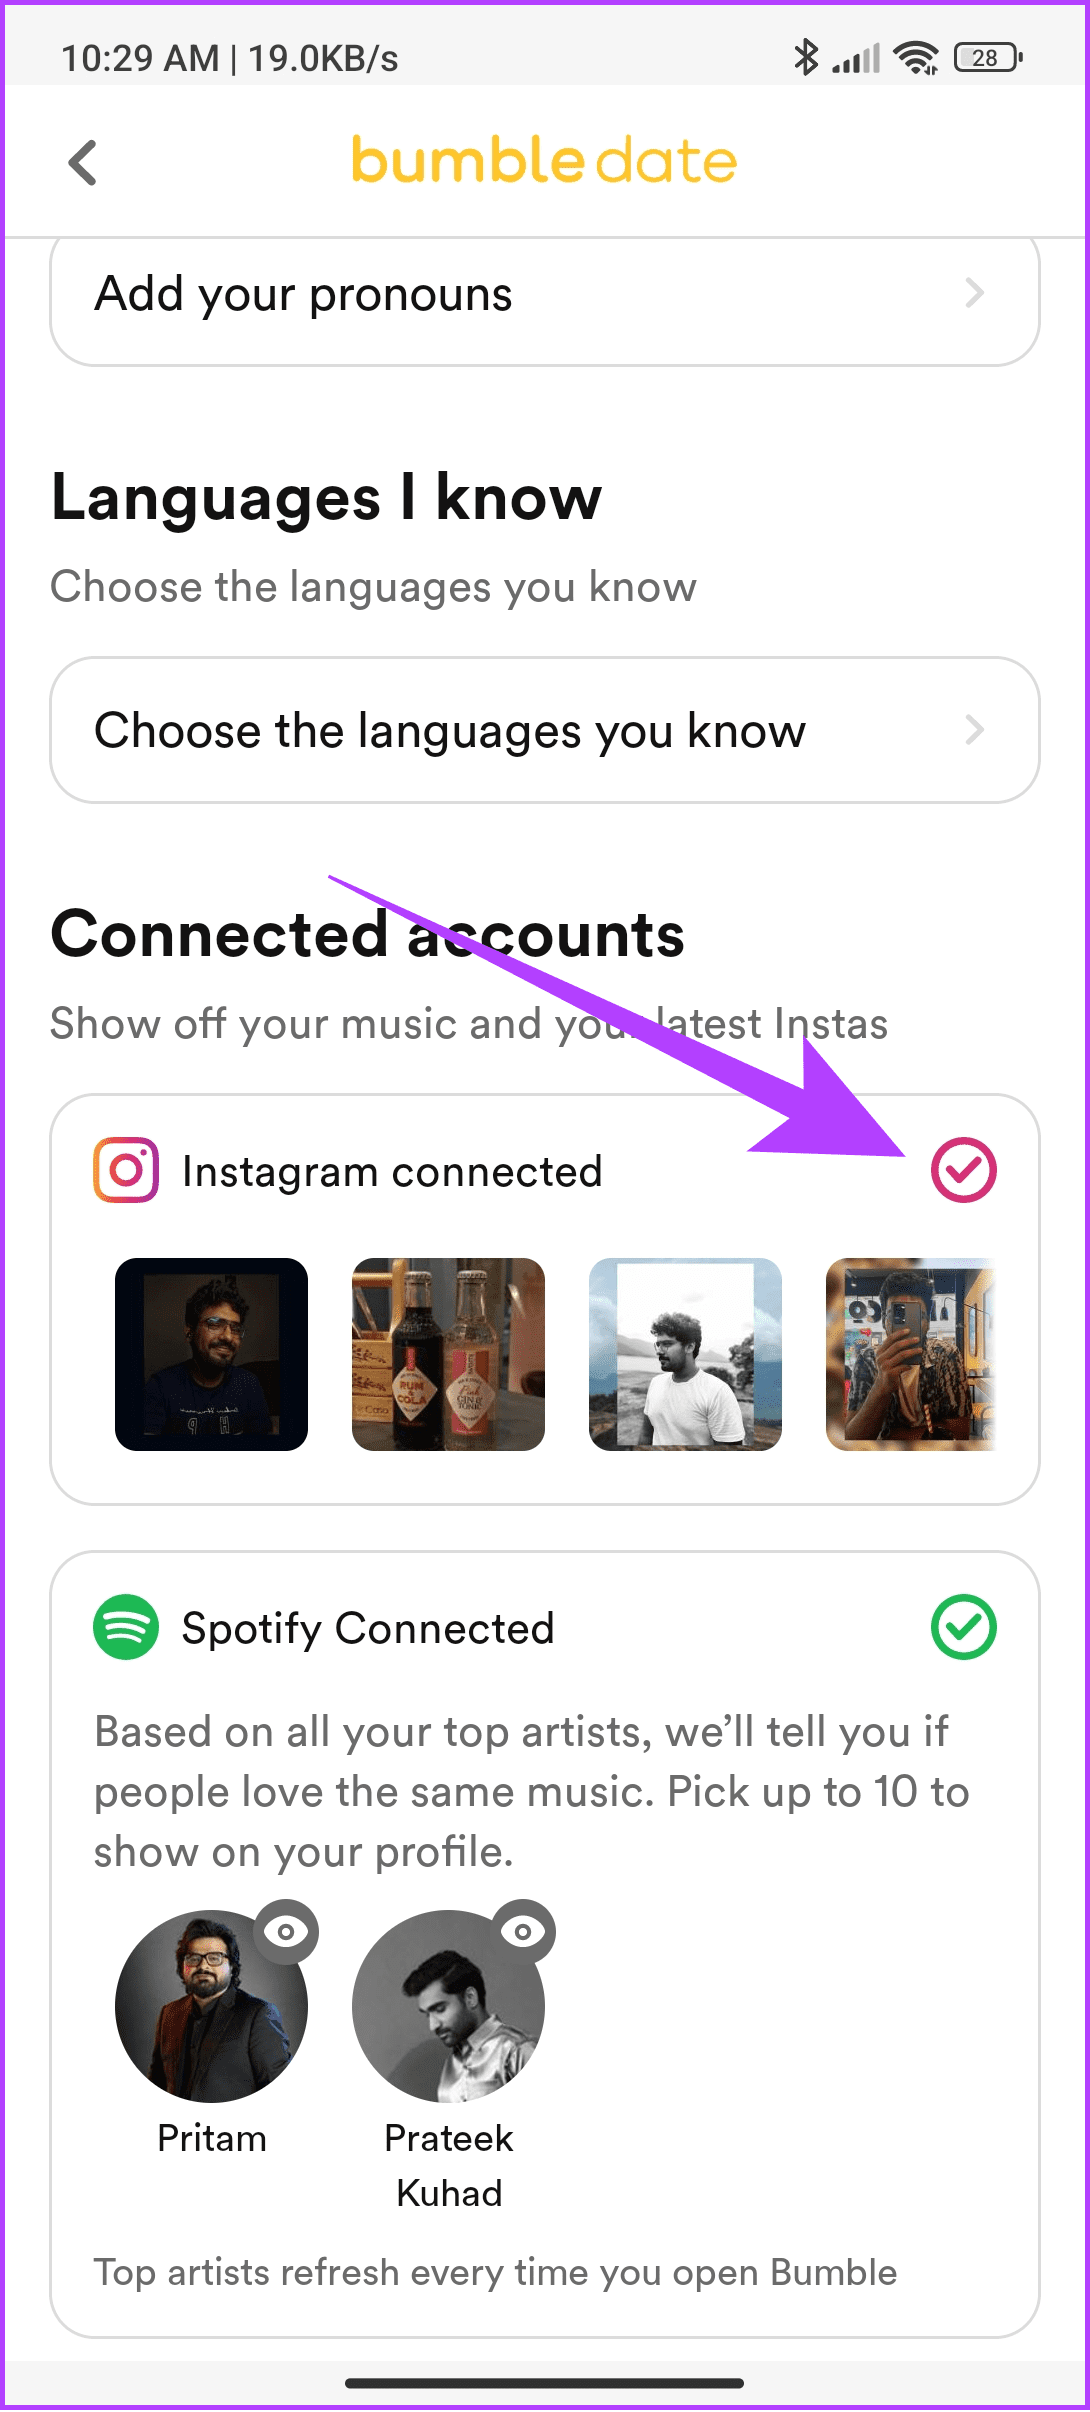 Choose Instagram connected